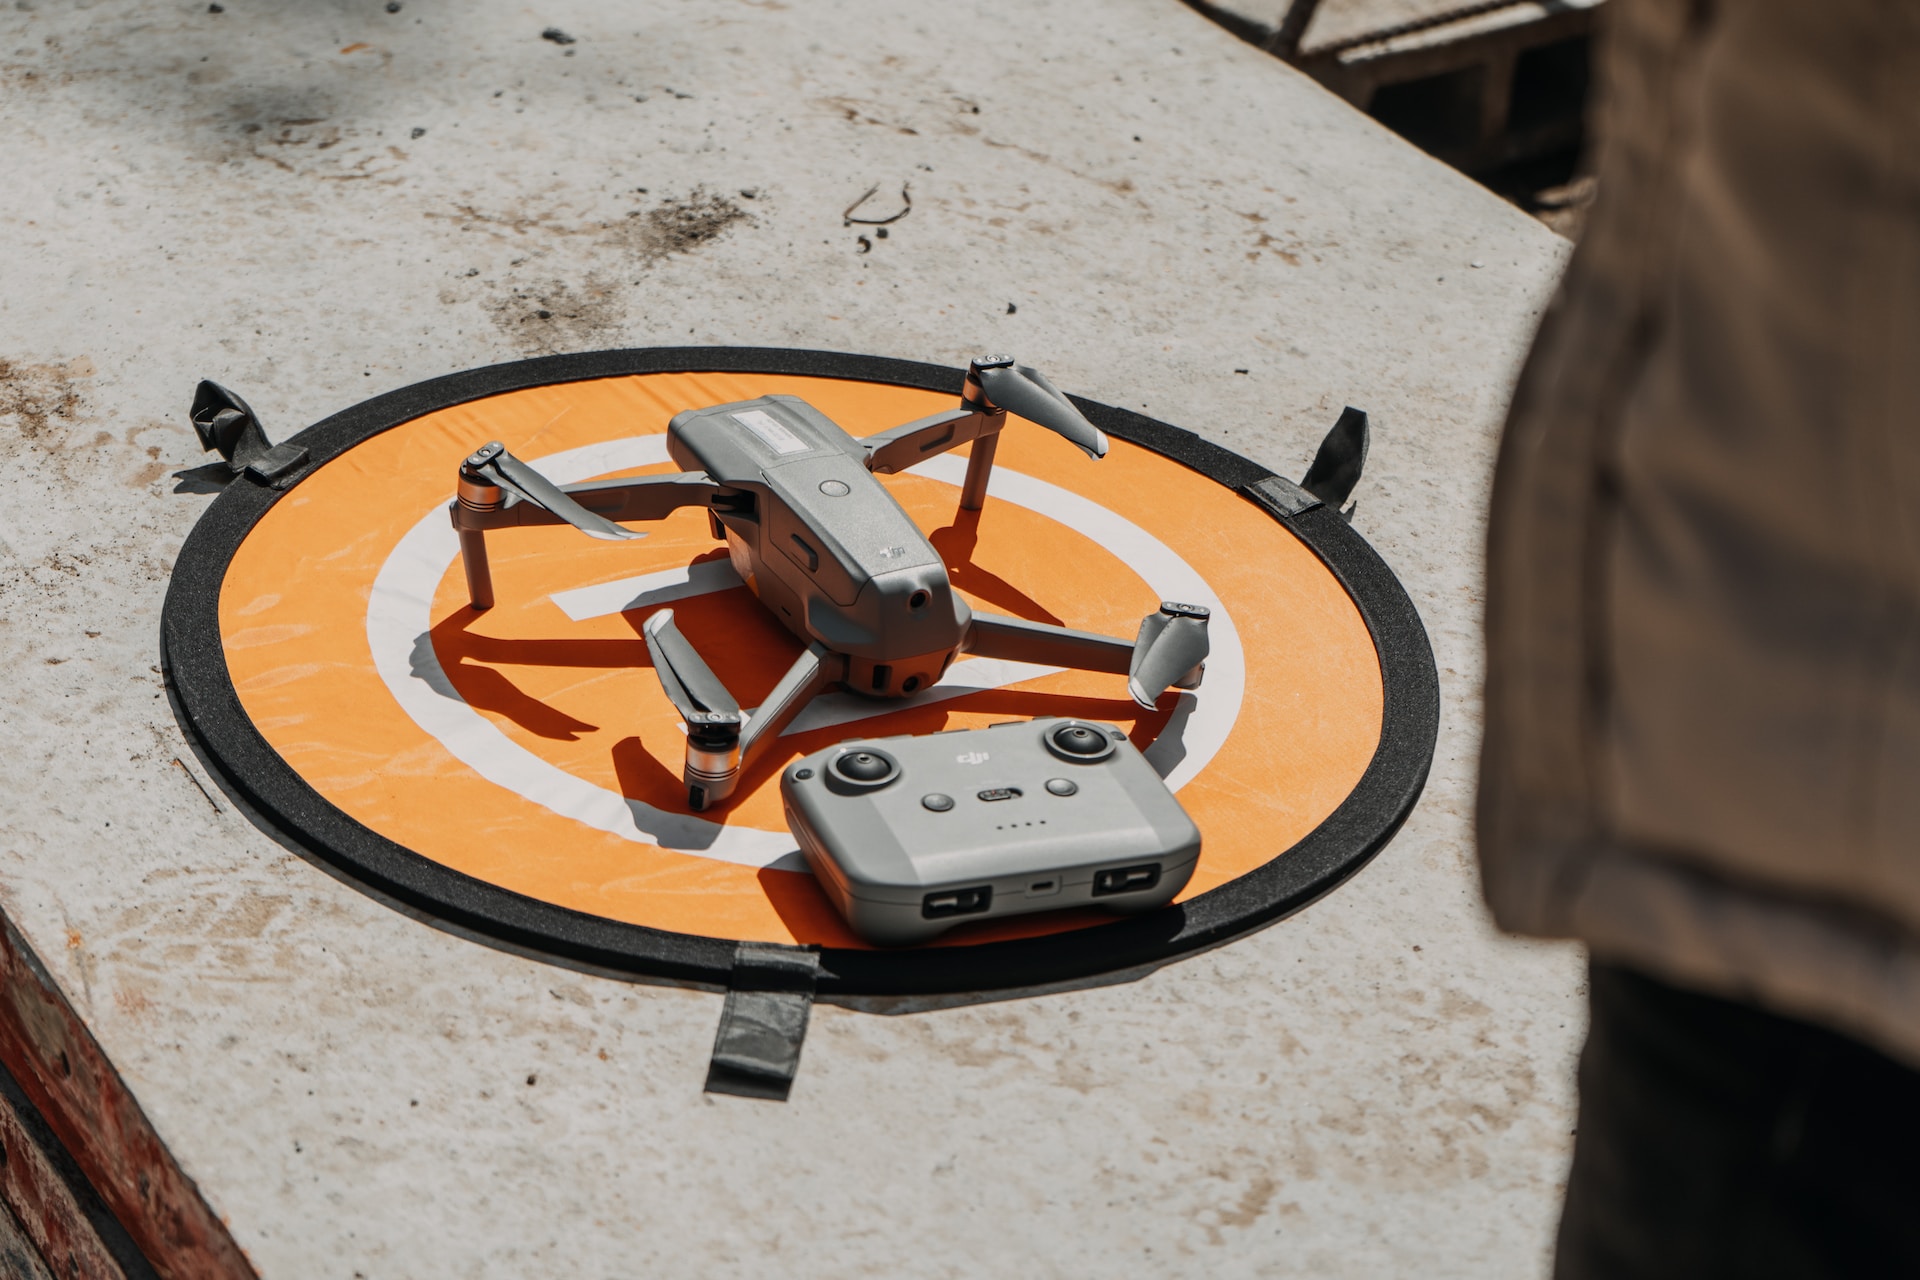 How the use of drones in construction is improving safety and efficiency